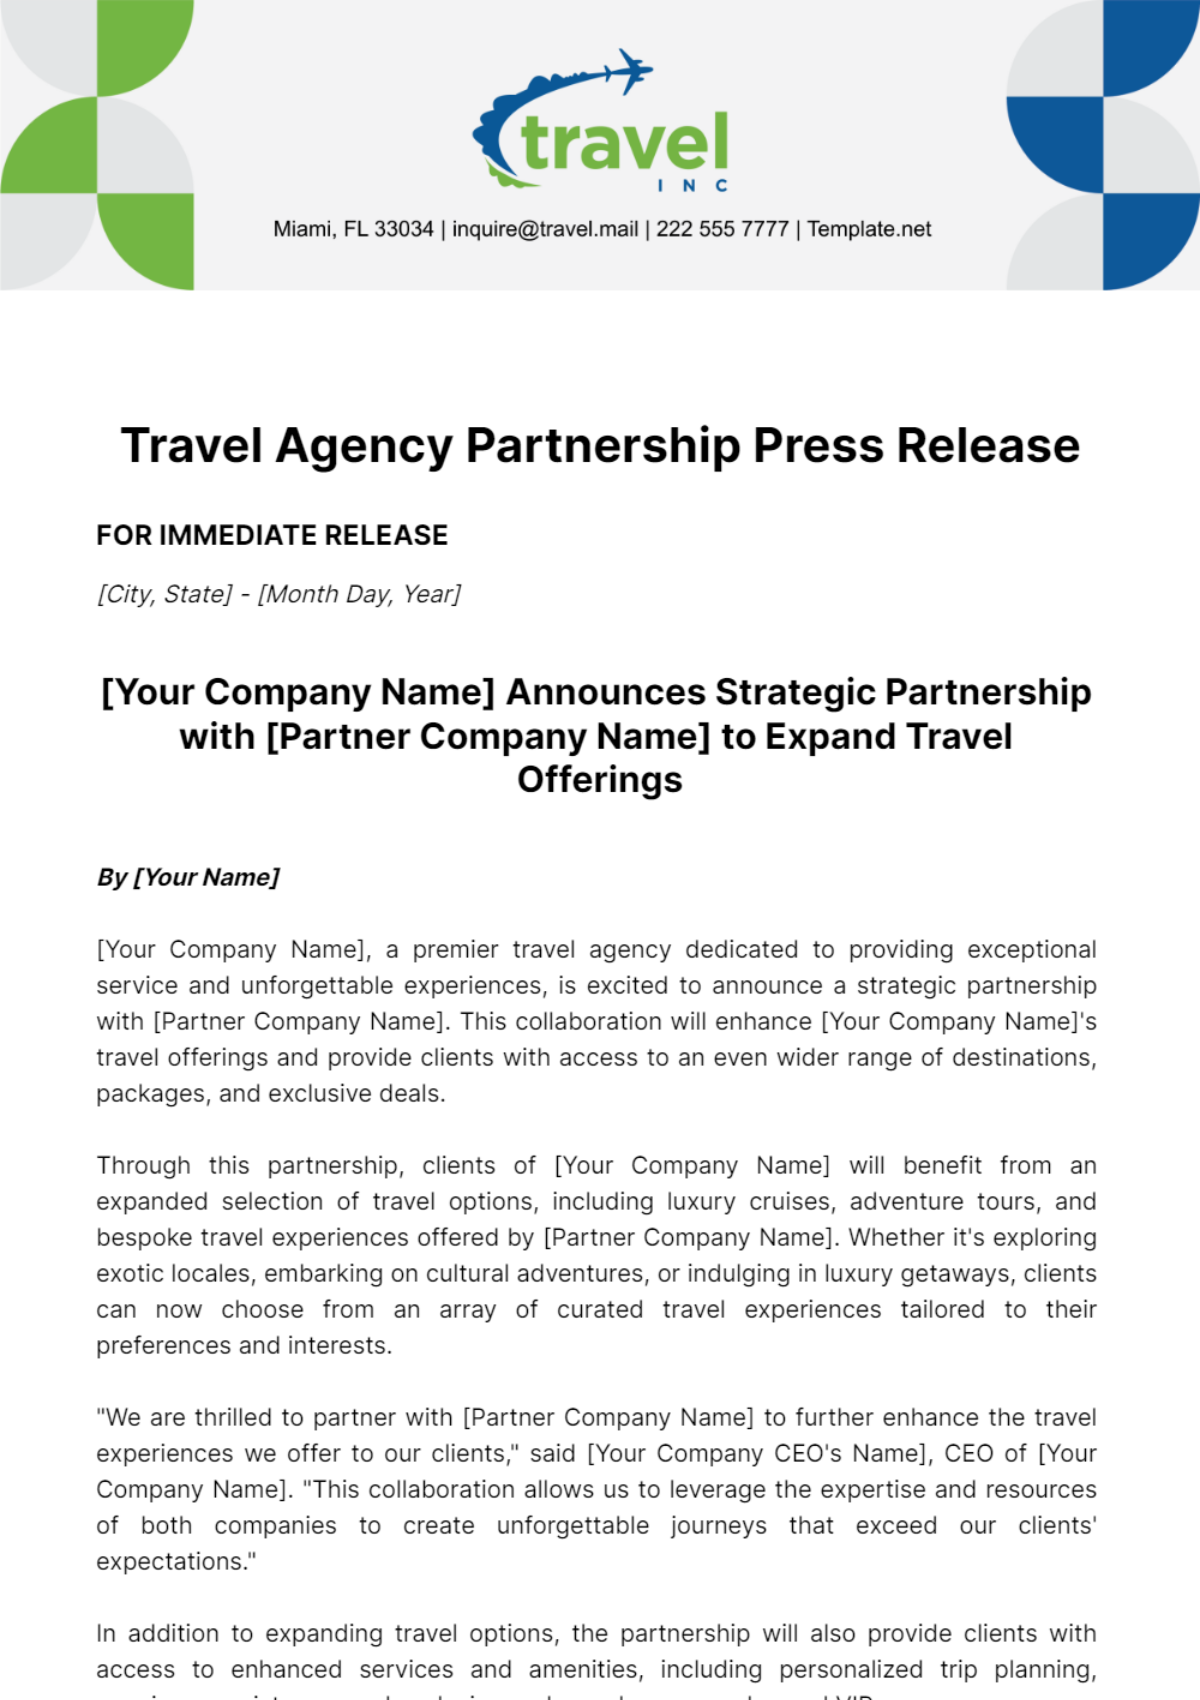 Travel Agency Partnership Press Release Template